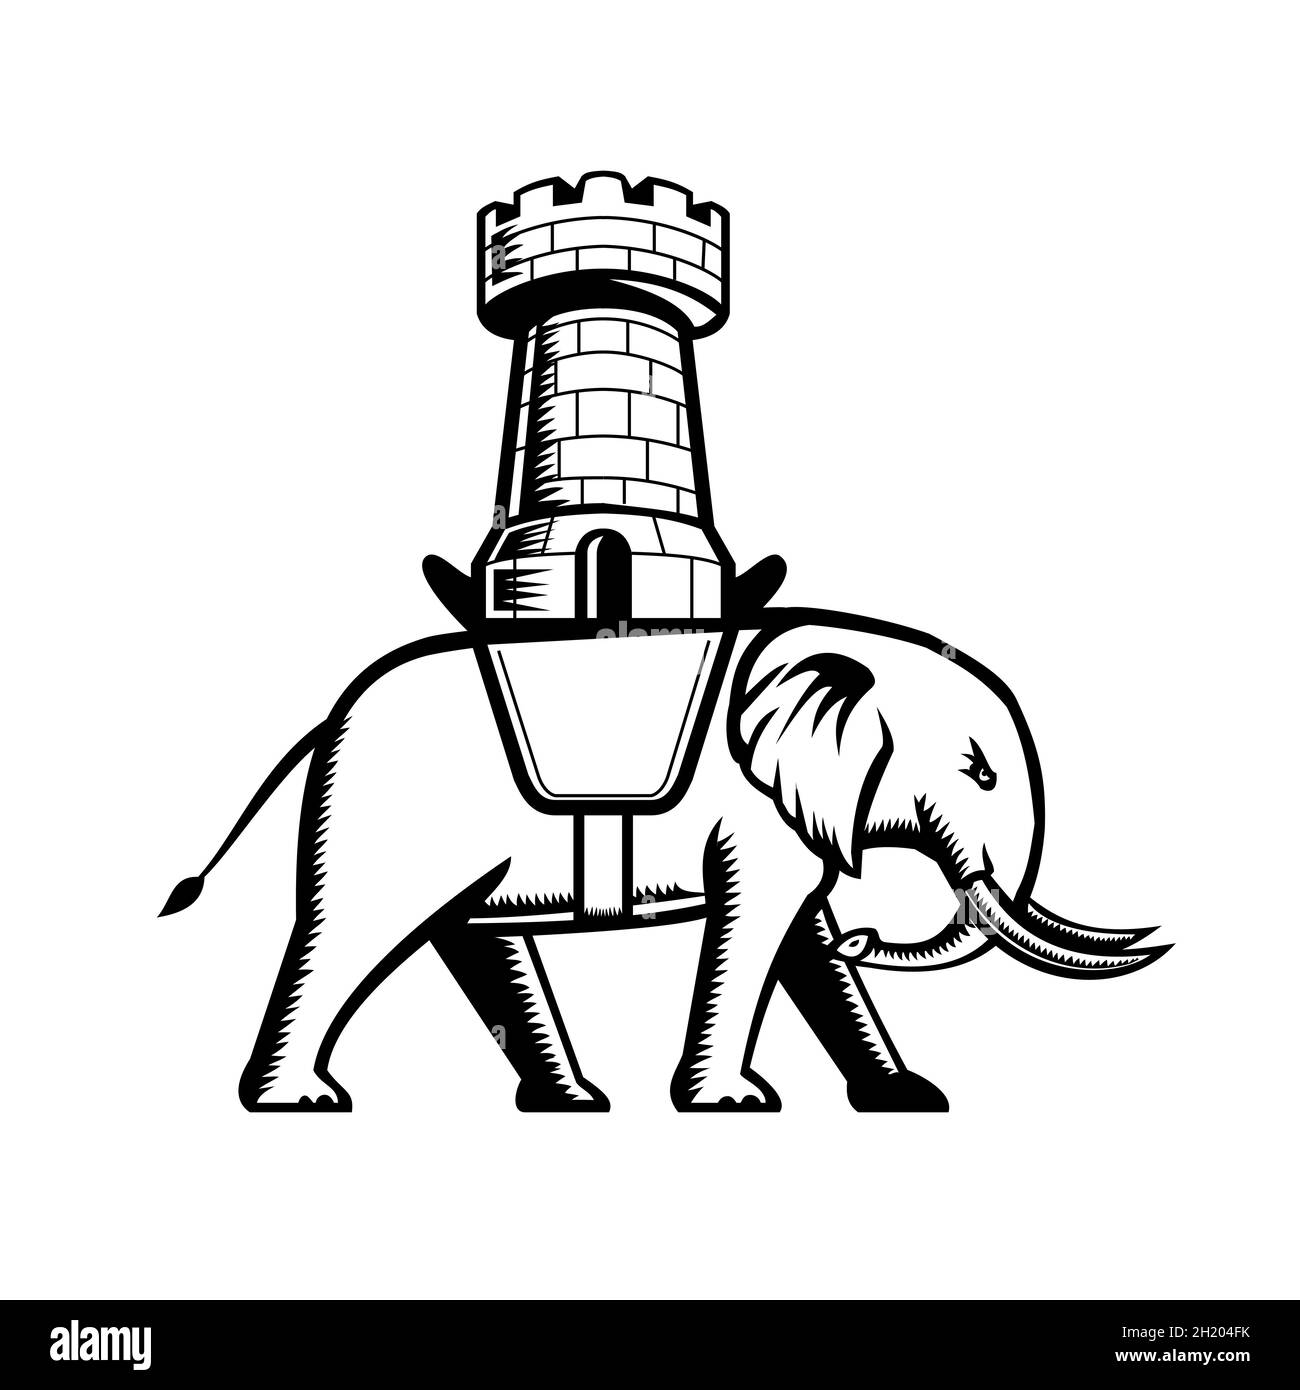 Elephant Wearing Saddle with Castle or Single Tower on Top Retro Woodcut Style Black and White Stock Photo